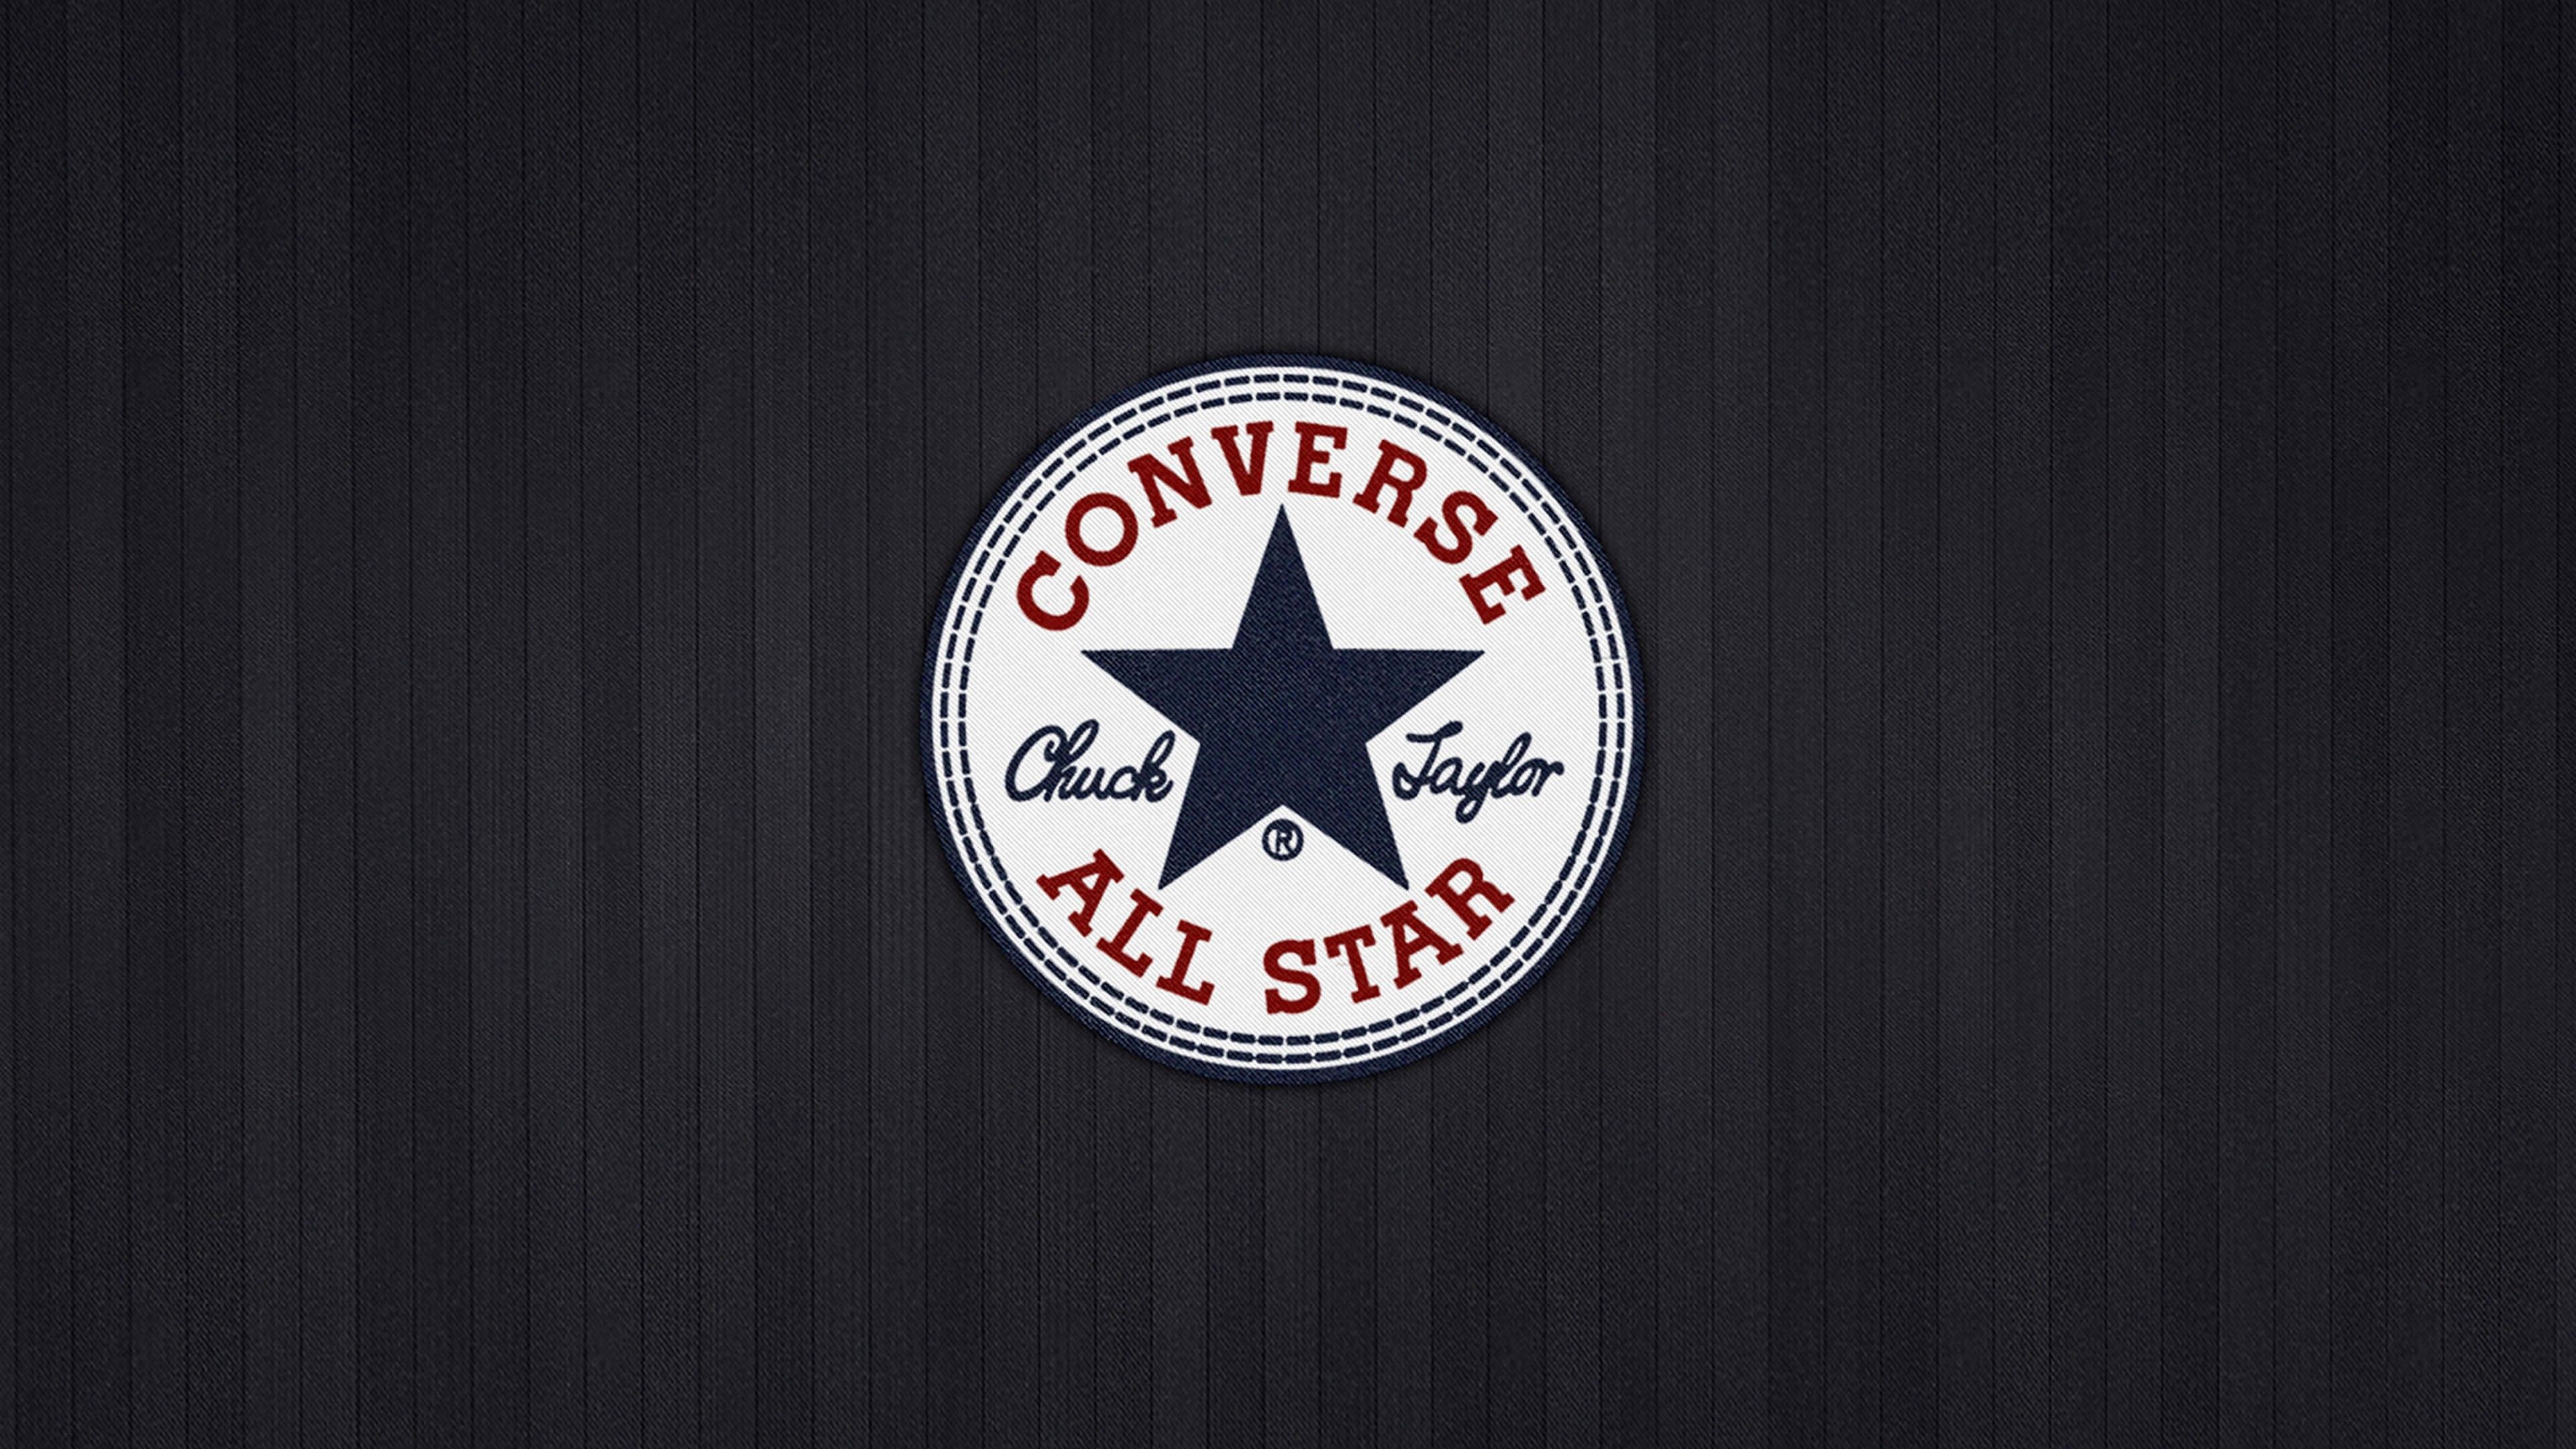 Converse 4K wallpaper for your desktop or mobile screen free and easy to download